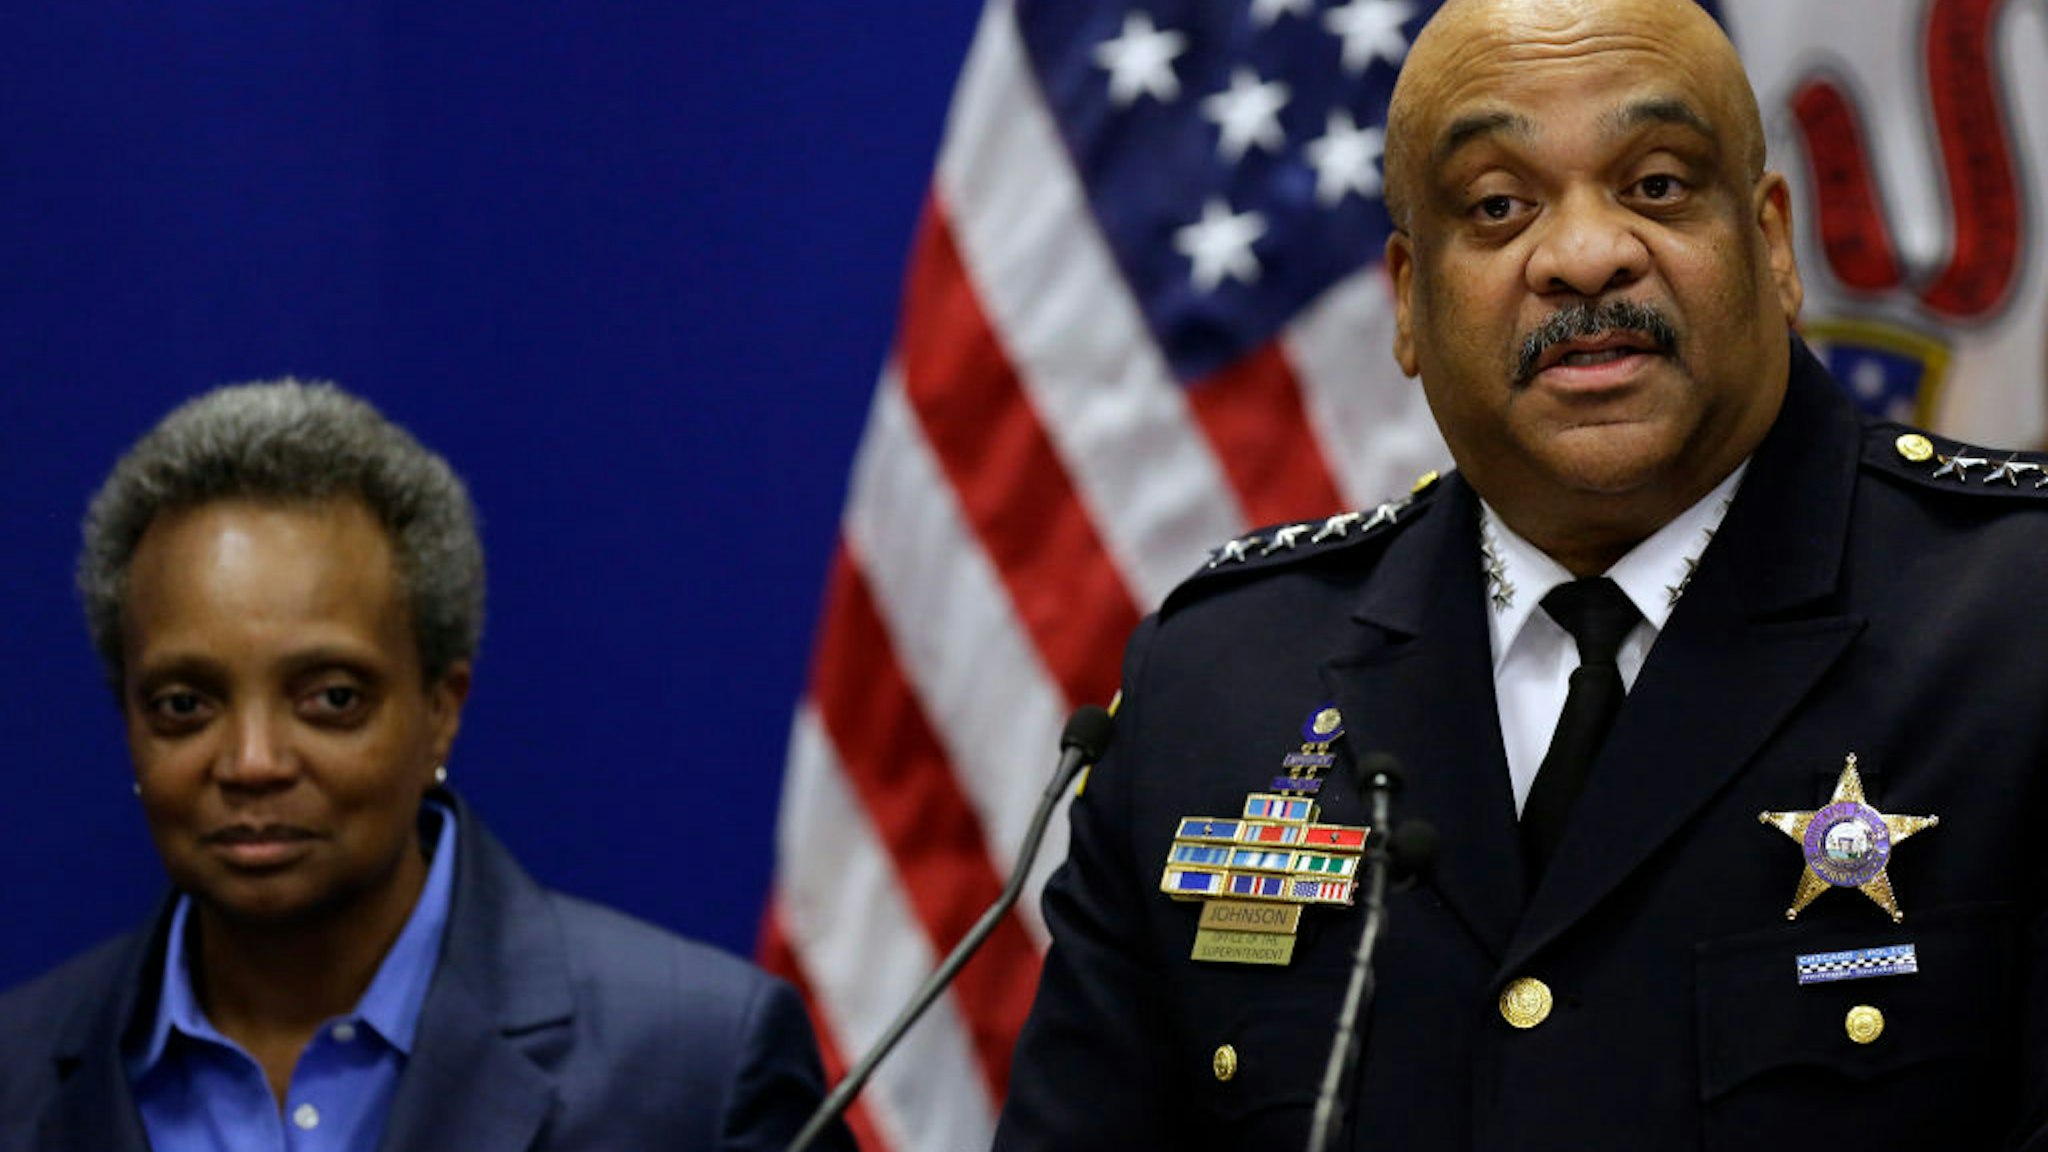 Chicago Police Department Superintendent Eddie Johnson announces his retirement during a news conference with Mayor Lori Lightfoot at the Chicago Police Department's headquarters November 7, 2019 in Chicago, Illinois.